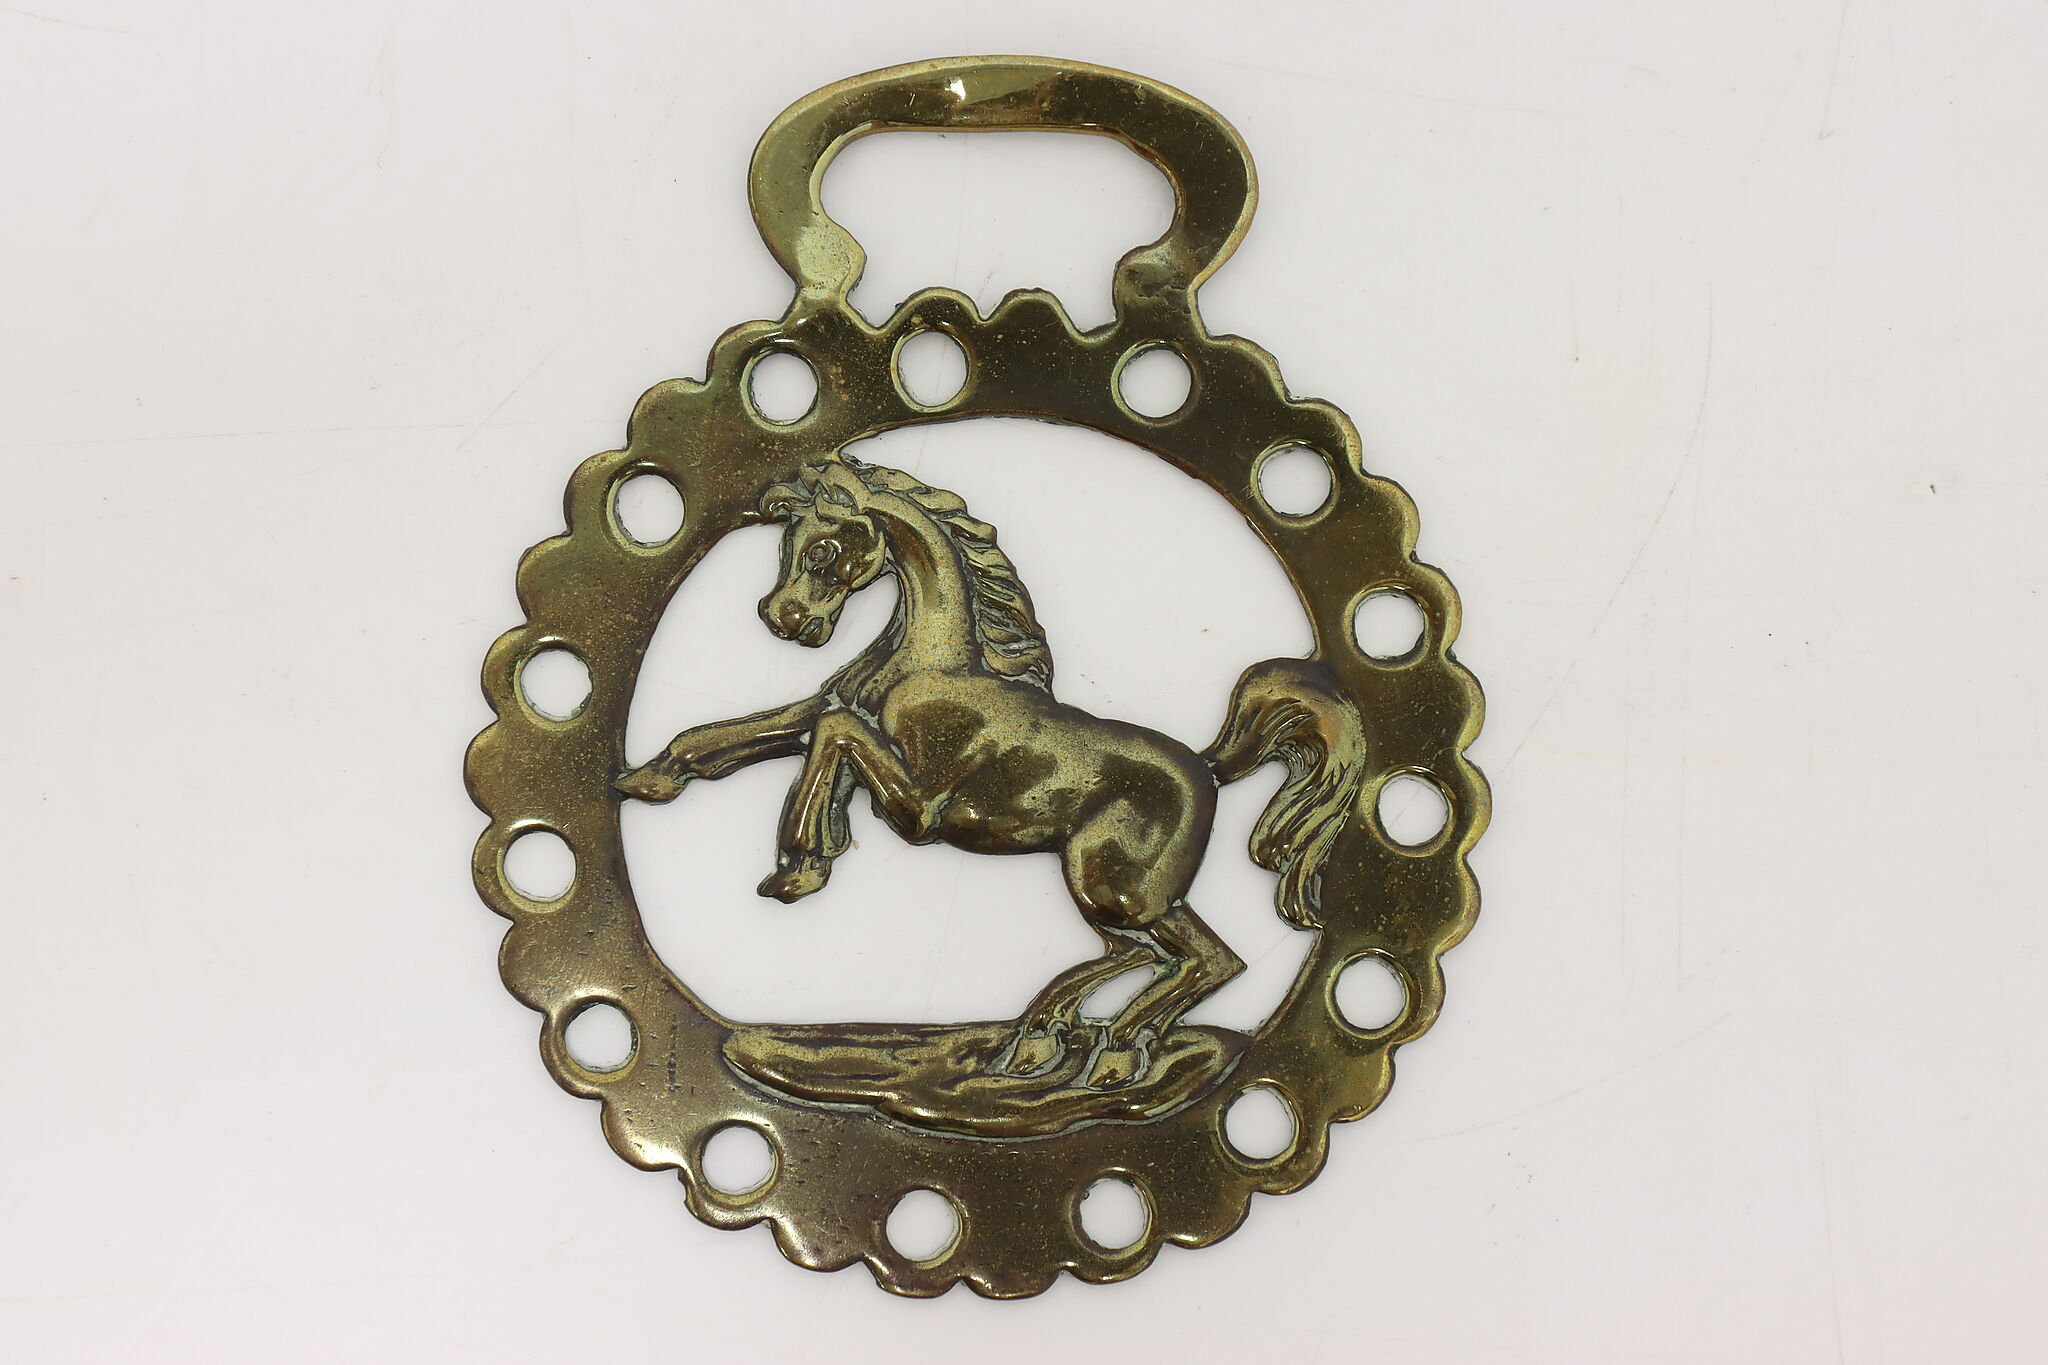 Horse Brass Bridle Harness Medallion, Two Humped Camel, Vintage